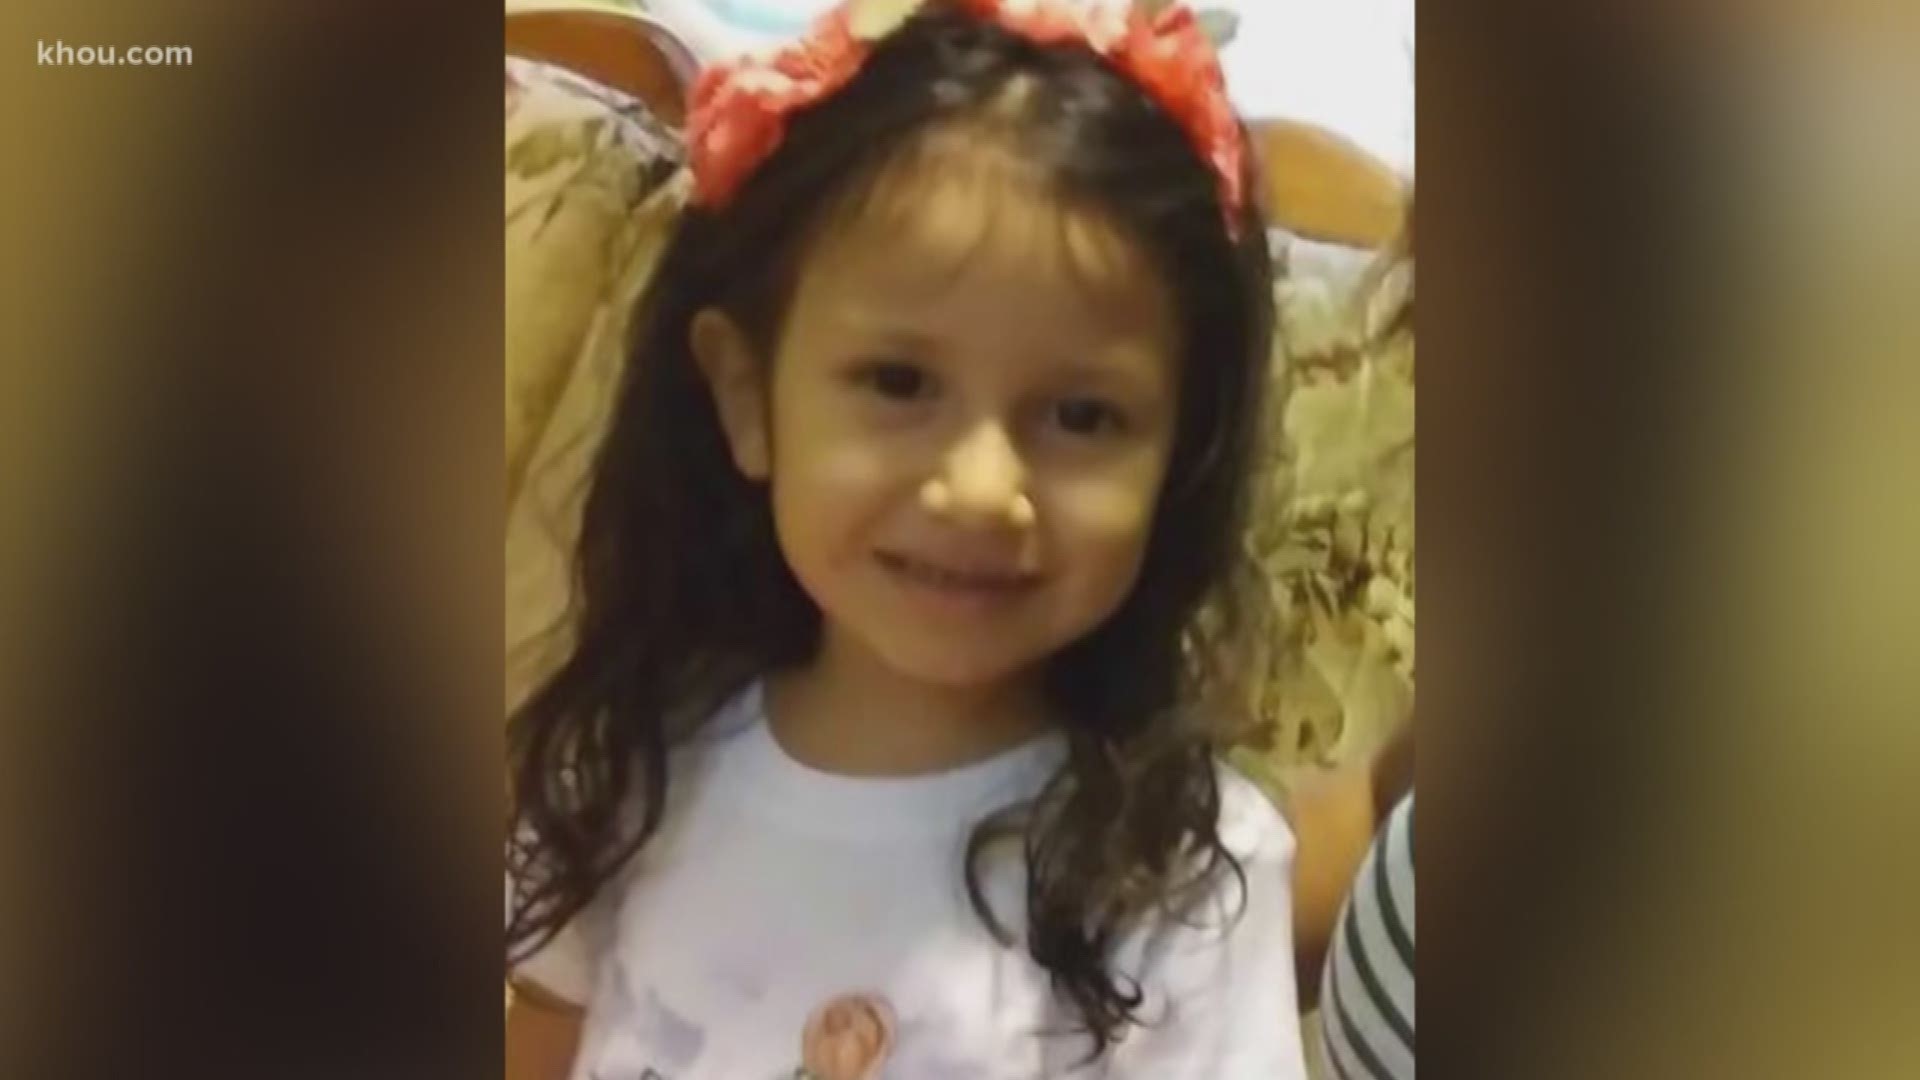 A 4-year-old girl is dead after her family's car plunged off the San Jacinto River Bridge. The little girl was not in a car seat, or buckled up. Authorities are stressing the importance of making sure kids are properly restrained.